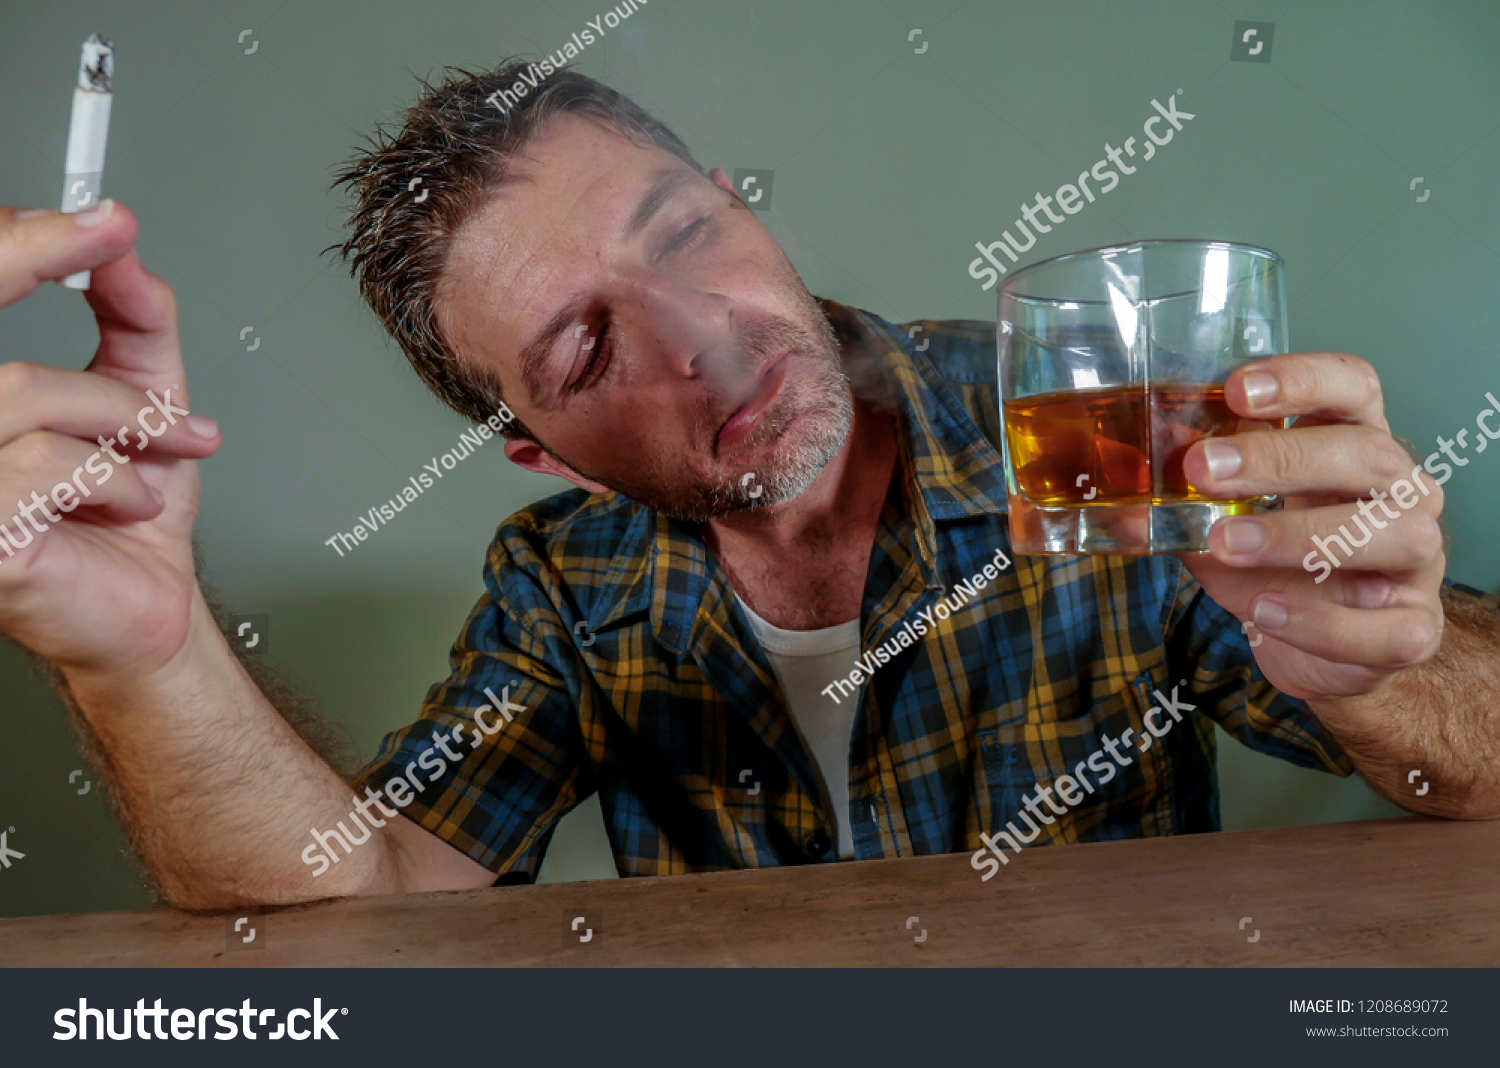 young messy and wasted addict man smoking cigarette having alcoholic drink looking at whiskey glass suffering alcoholism and tobacco addiction in unhealthy habit concept and alcohol abuse #1208689072